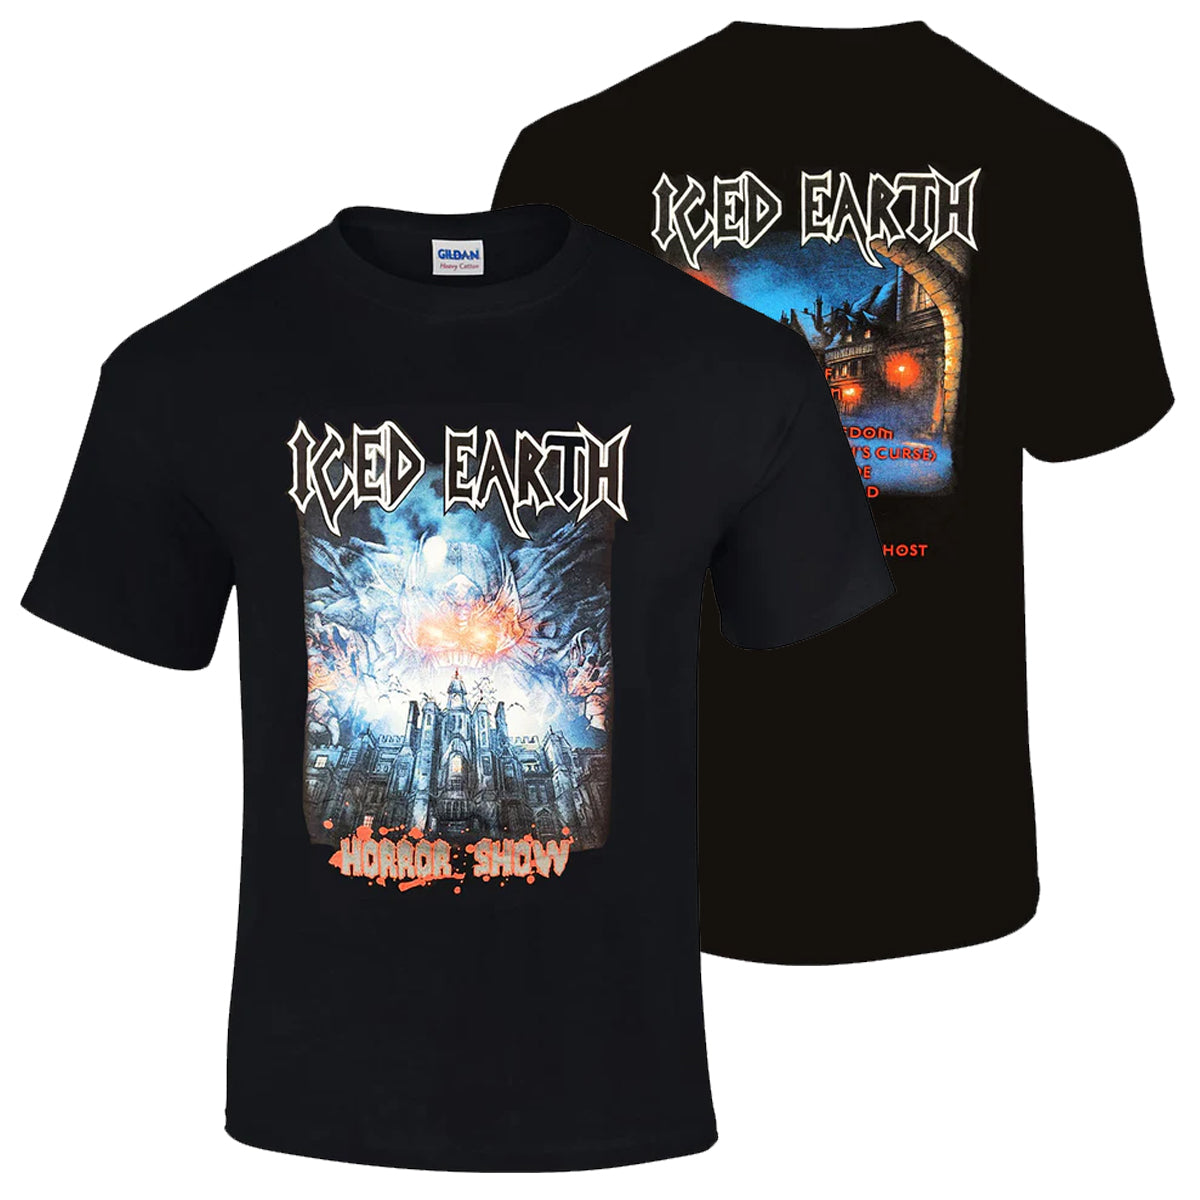 ICED EARTH Horror Show Song Back T-Shirt